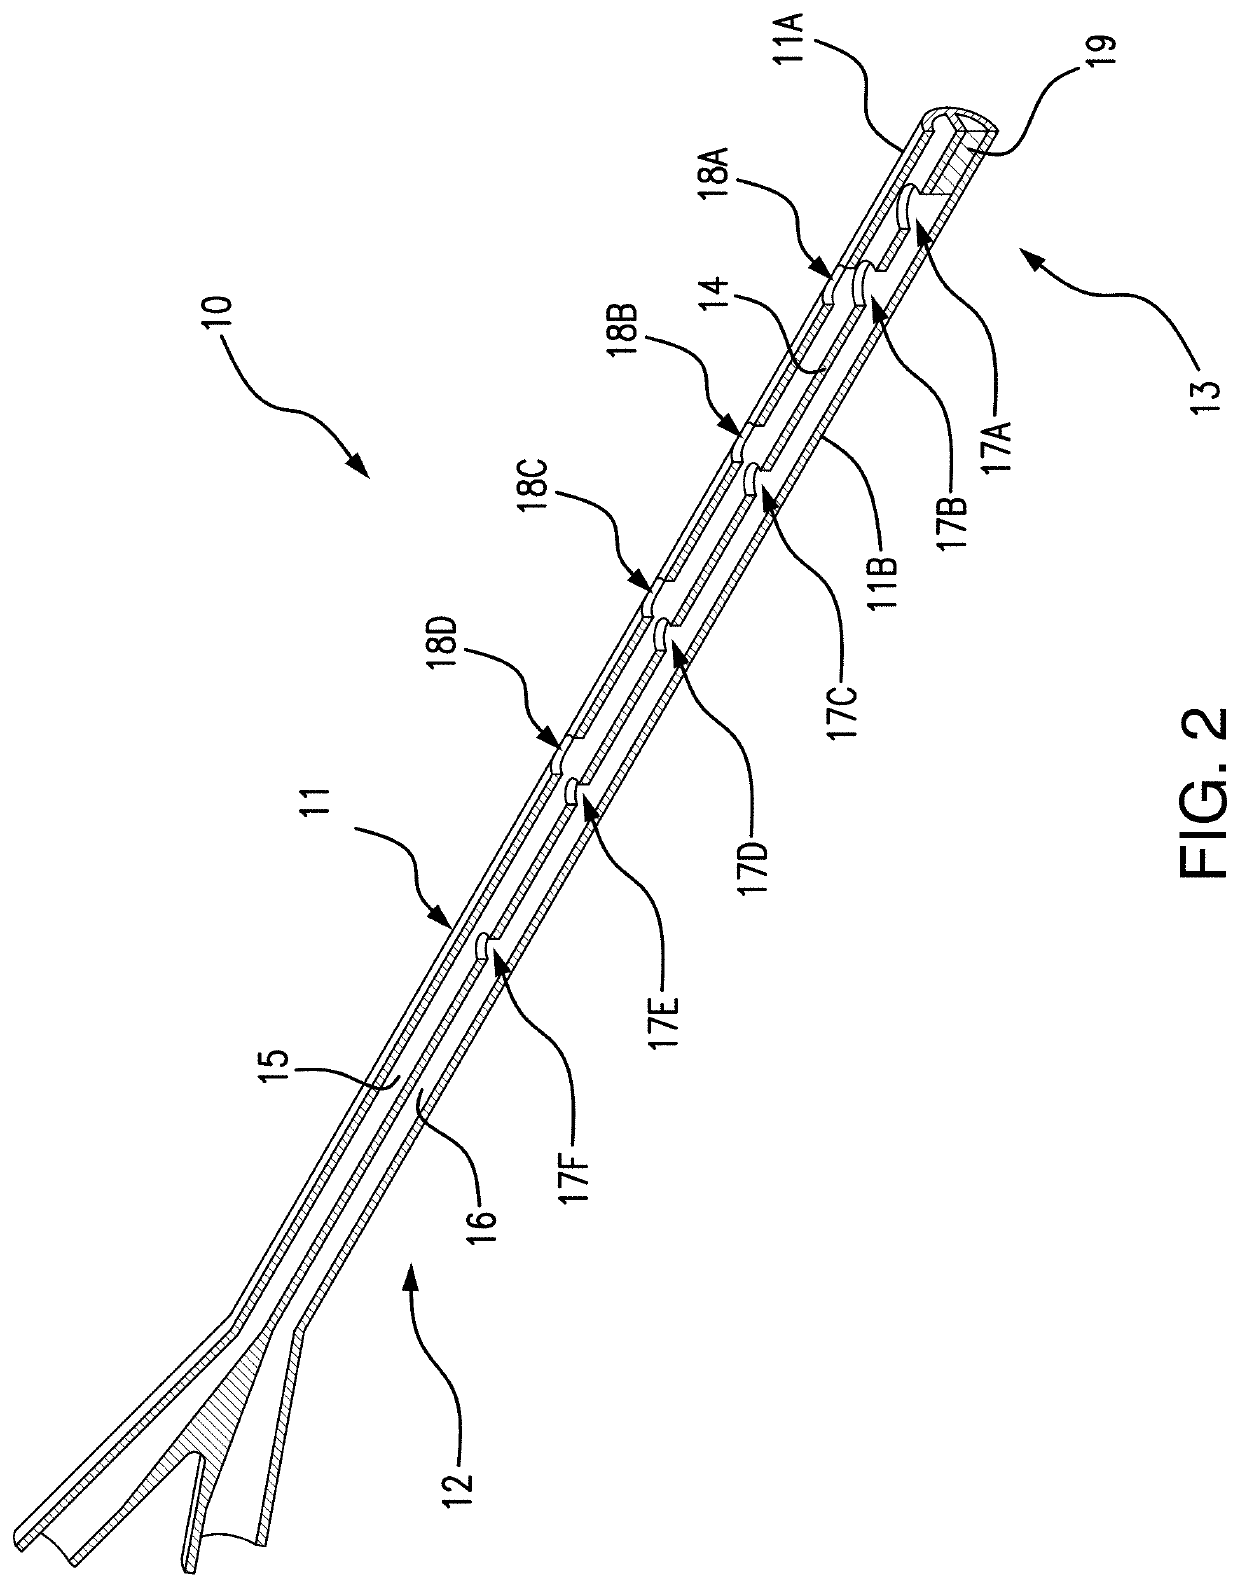 Systems and methods for percutaneous drainage